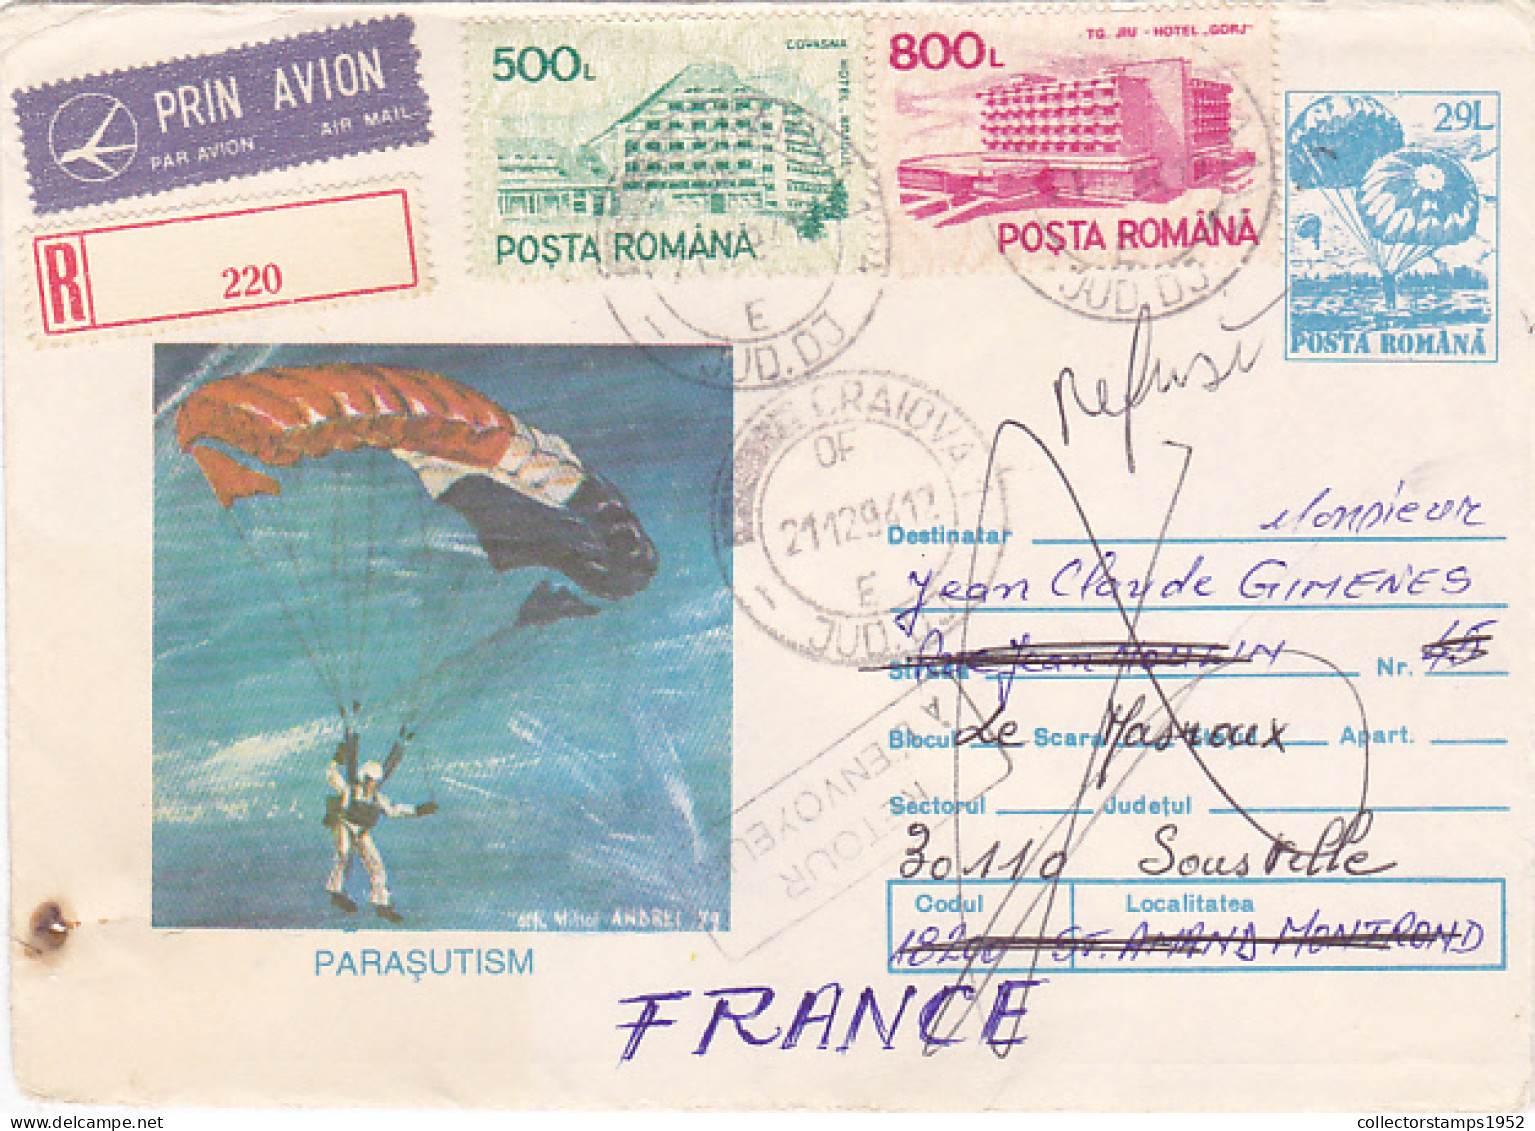 PARACHUTTING, SPORTS, REGISTERED COVER STATIONERY, 1993, ROMANIA - Paracaidismo